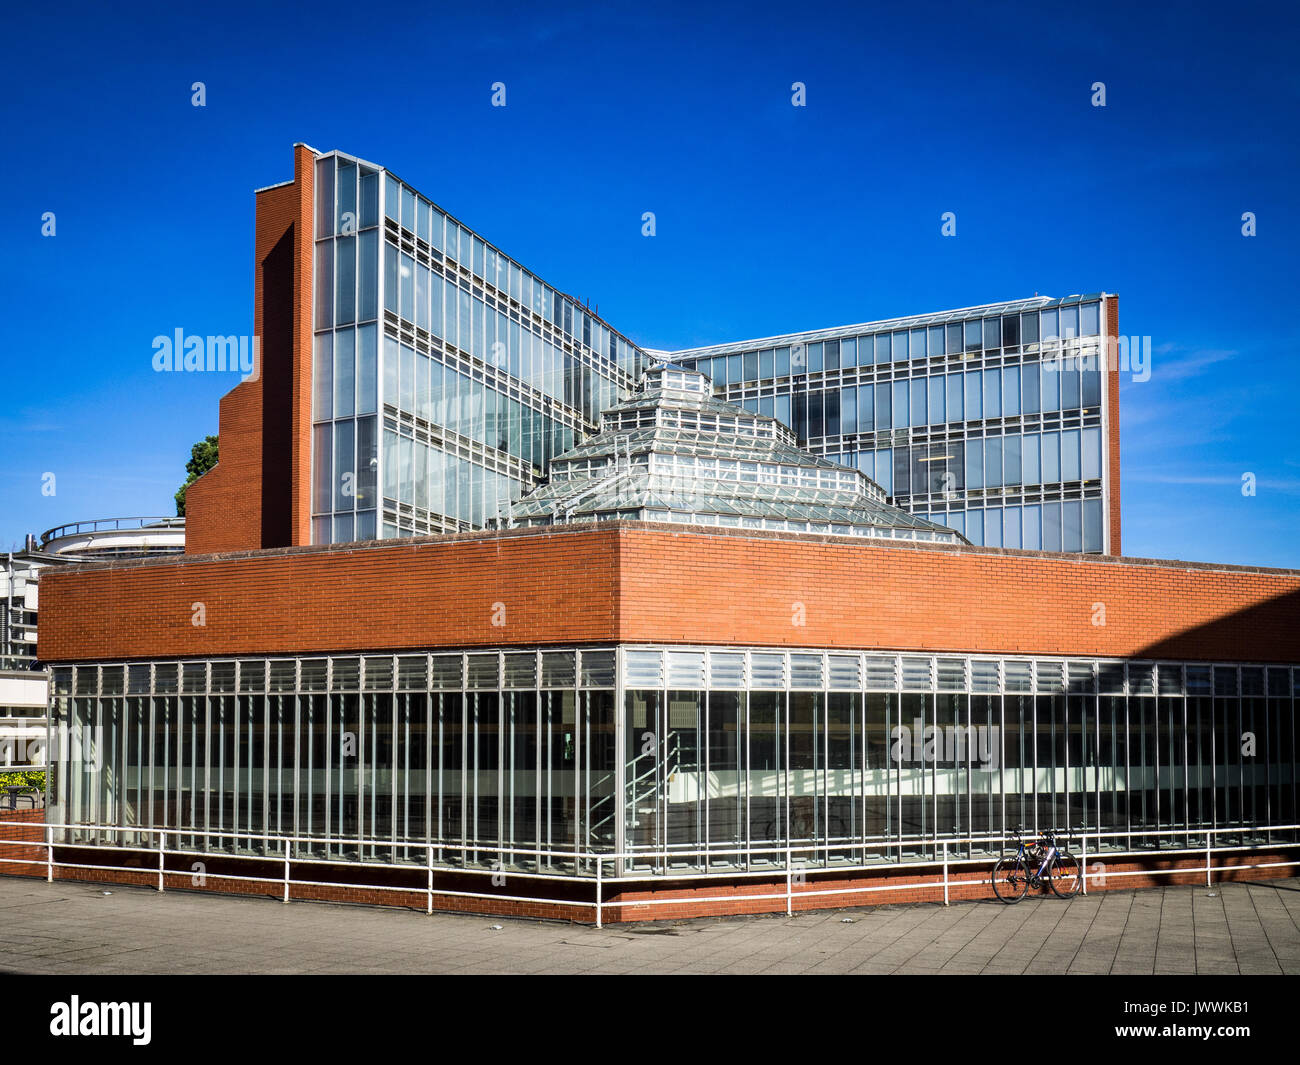 Faculty of History, Sidgwick Site, Cambridge University, UK - completed in 1968, architect James Stirling. Stock Photo